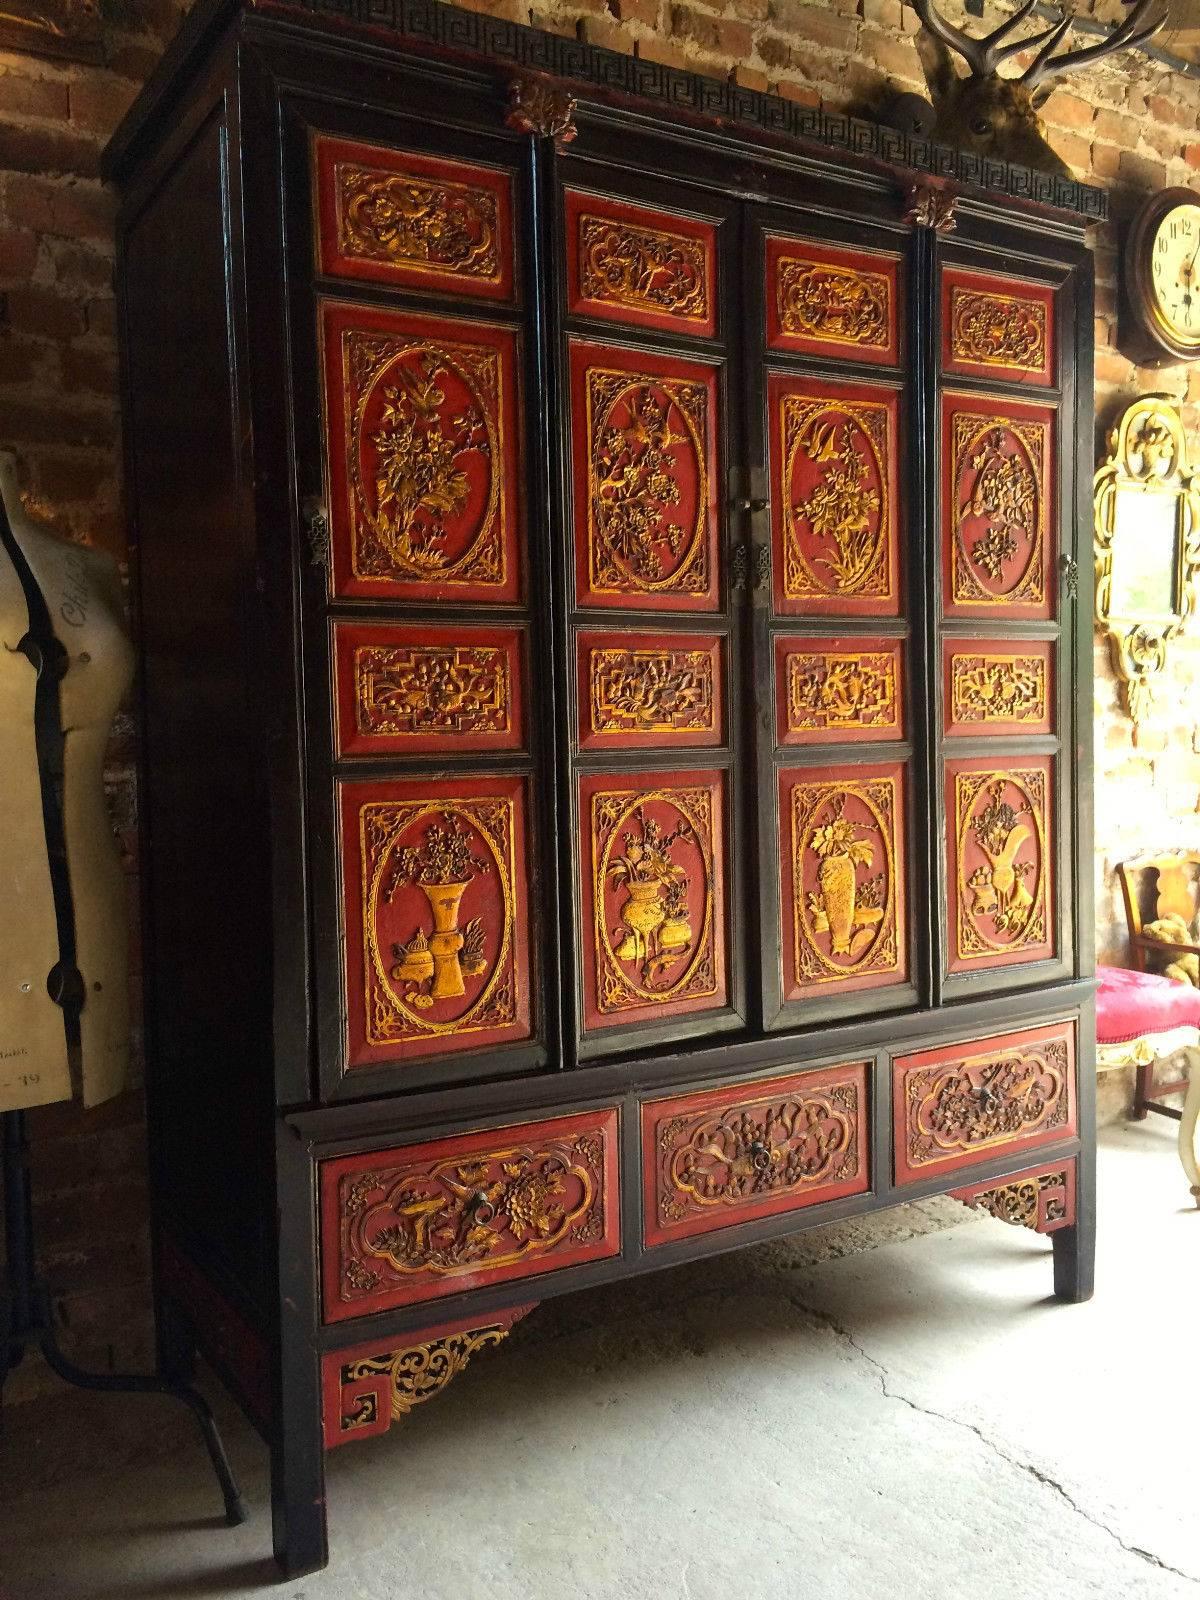 Antique early 20th century Chinese lacquered chinoiserie four-door wardrobe armoire decorated in red and gold lacquer, the doors and base heavily decorated with embossed flowers, corniced top with ‘Greek Key’ design over four cupboard doors with